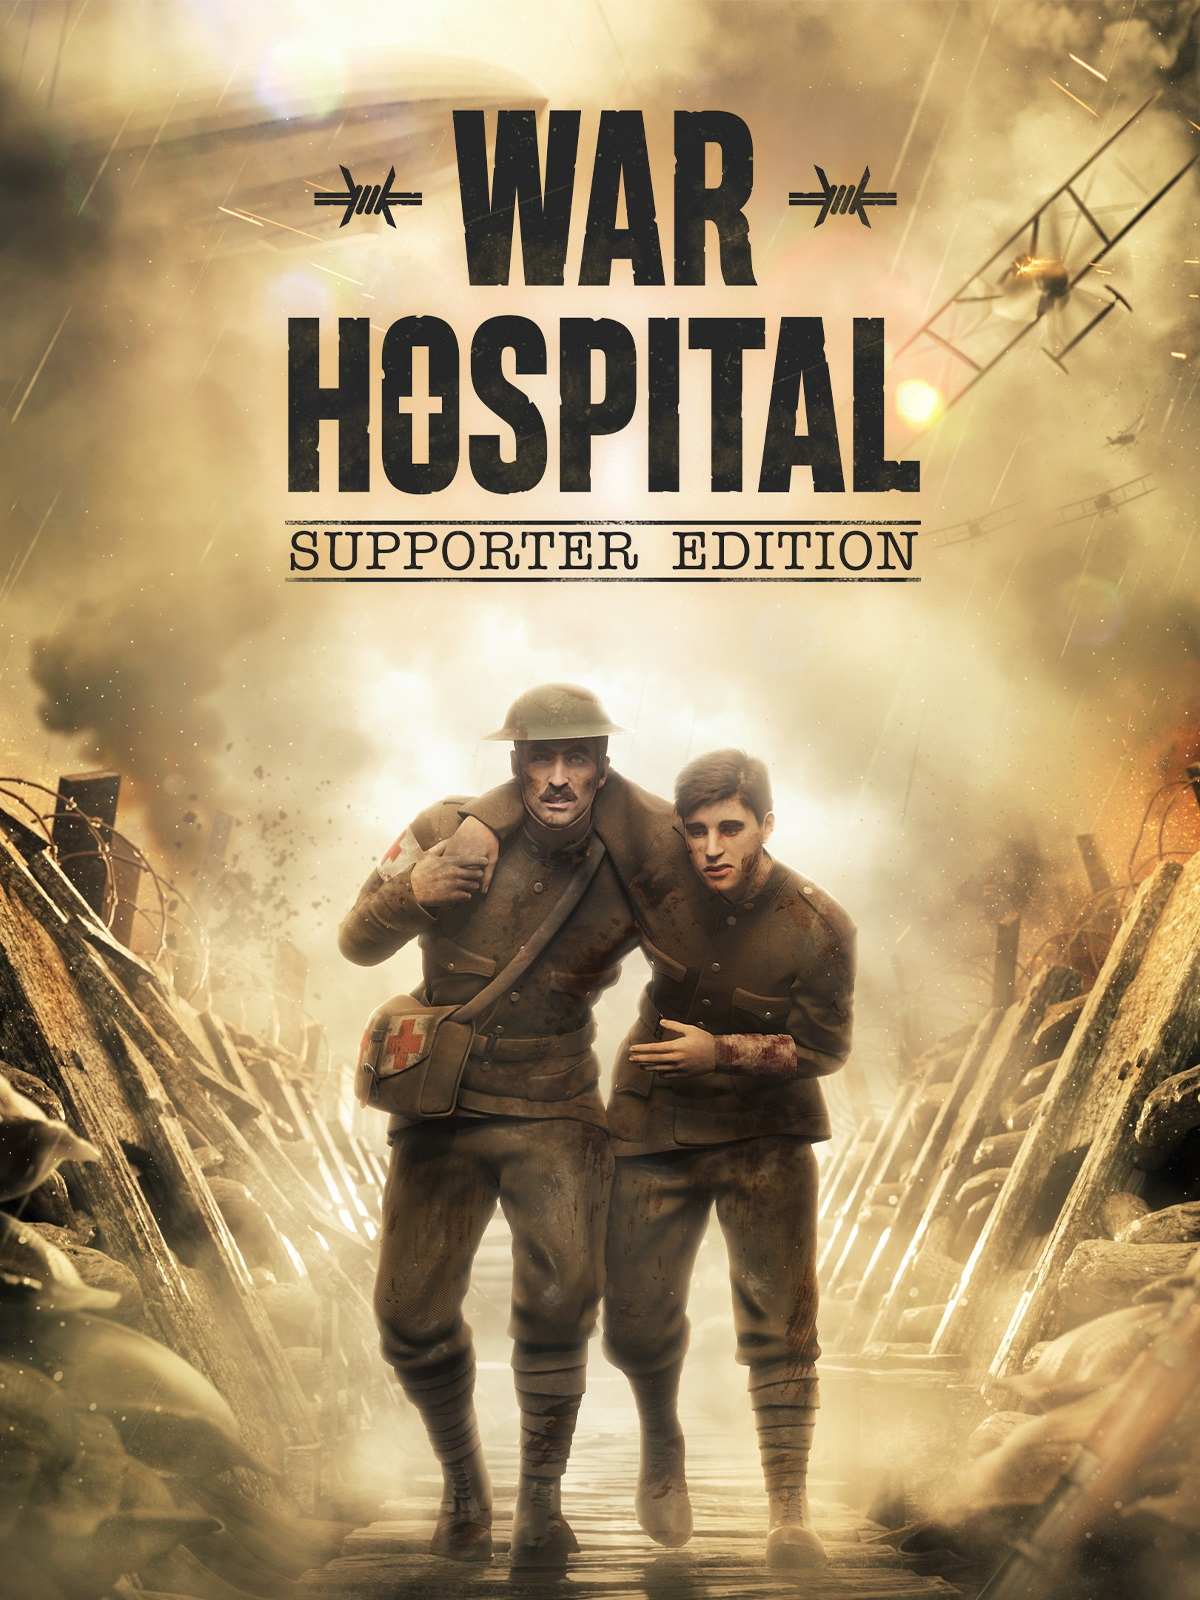 War Hospital. Supporter Edition [PC, Цифровая версия] (Цифровая версия) цена и фото